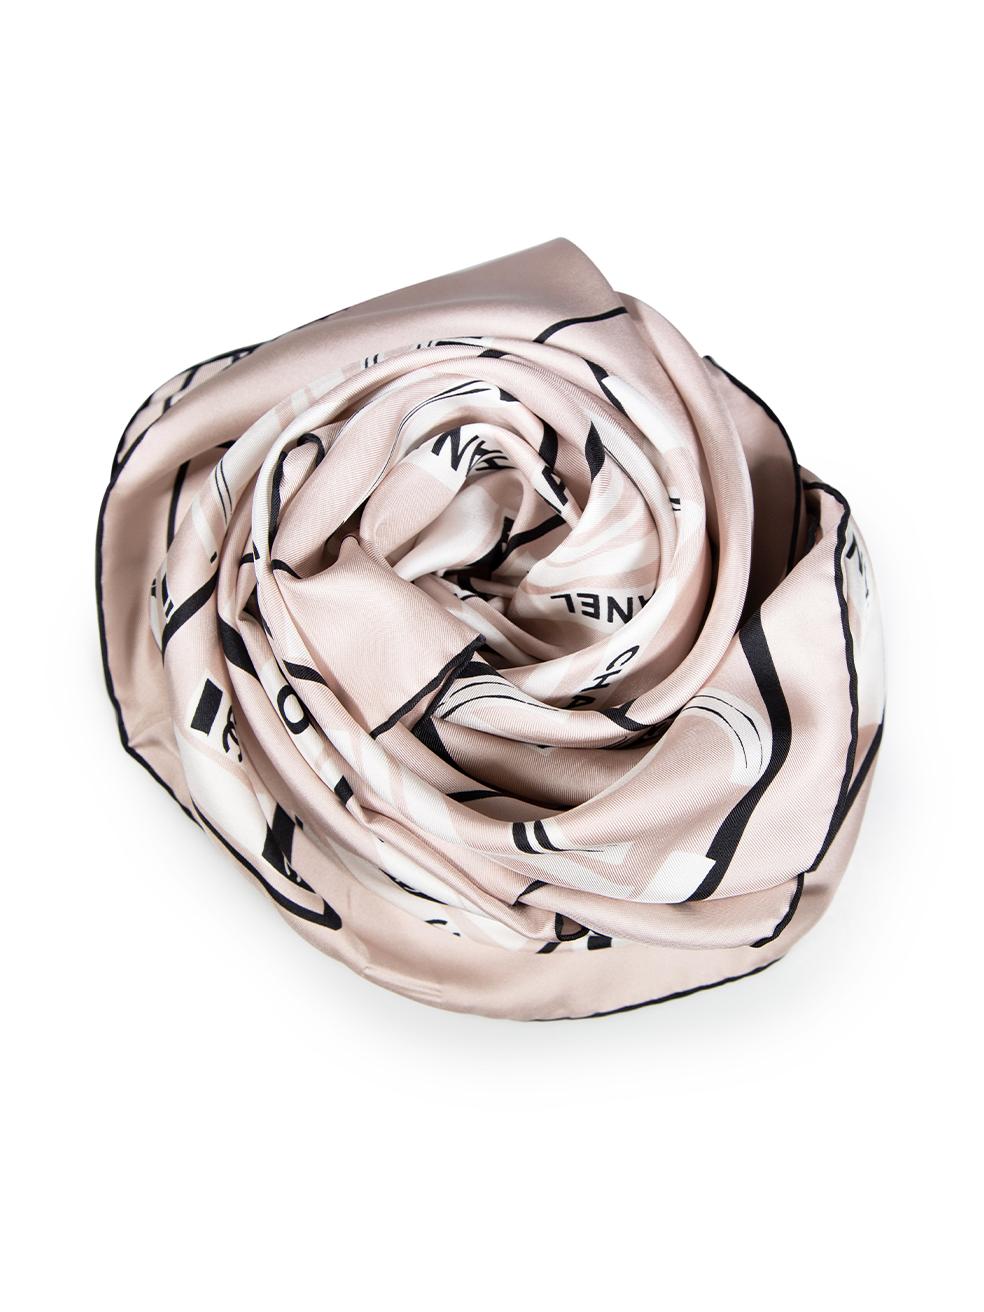 CONDITION is Good. Minor wear to scarf is evident. Light wear to the fabric with a handful of small discoloured marks and plucks to the weave on this used Chanel designer resale item.
 
 
 
 Details
 
 
 Pink
 
 Silk
 
 Scarf
 
 Square
 
 Logo book